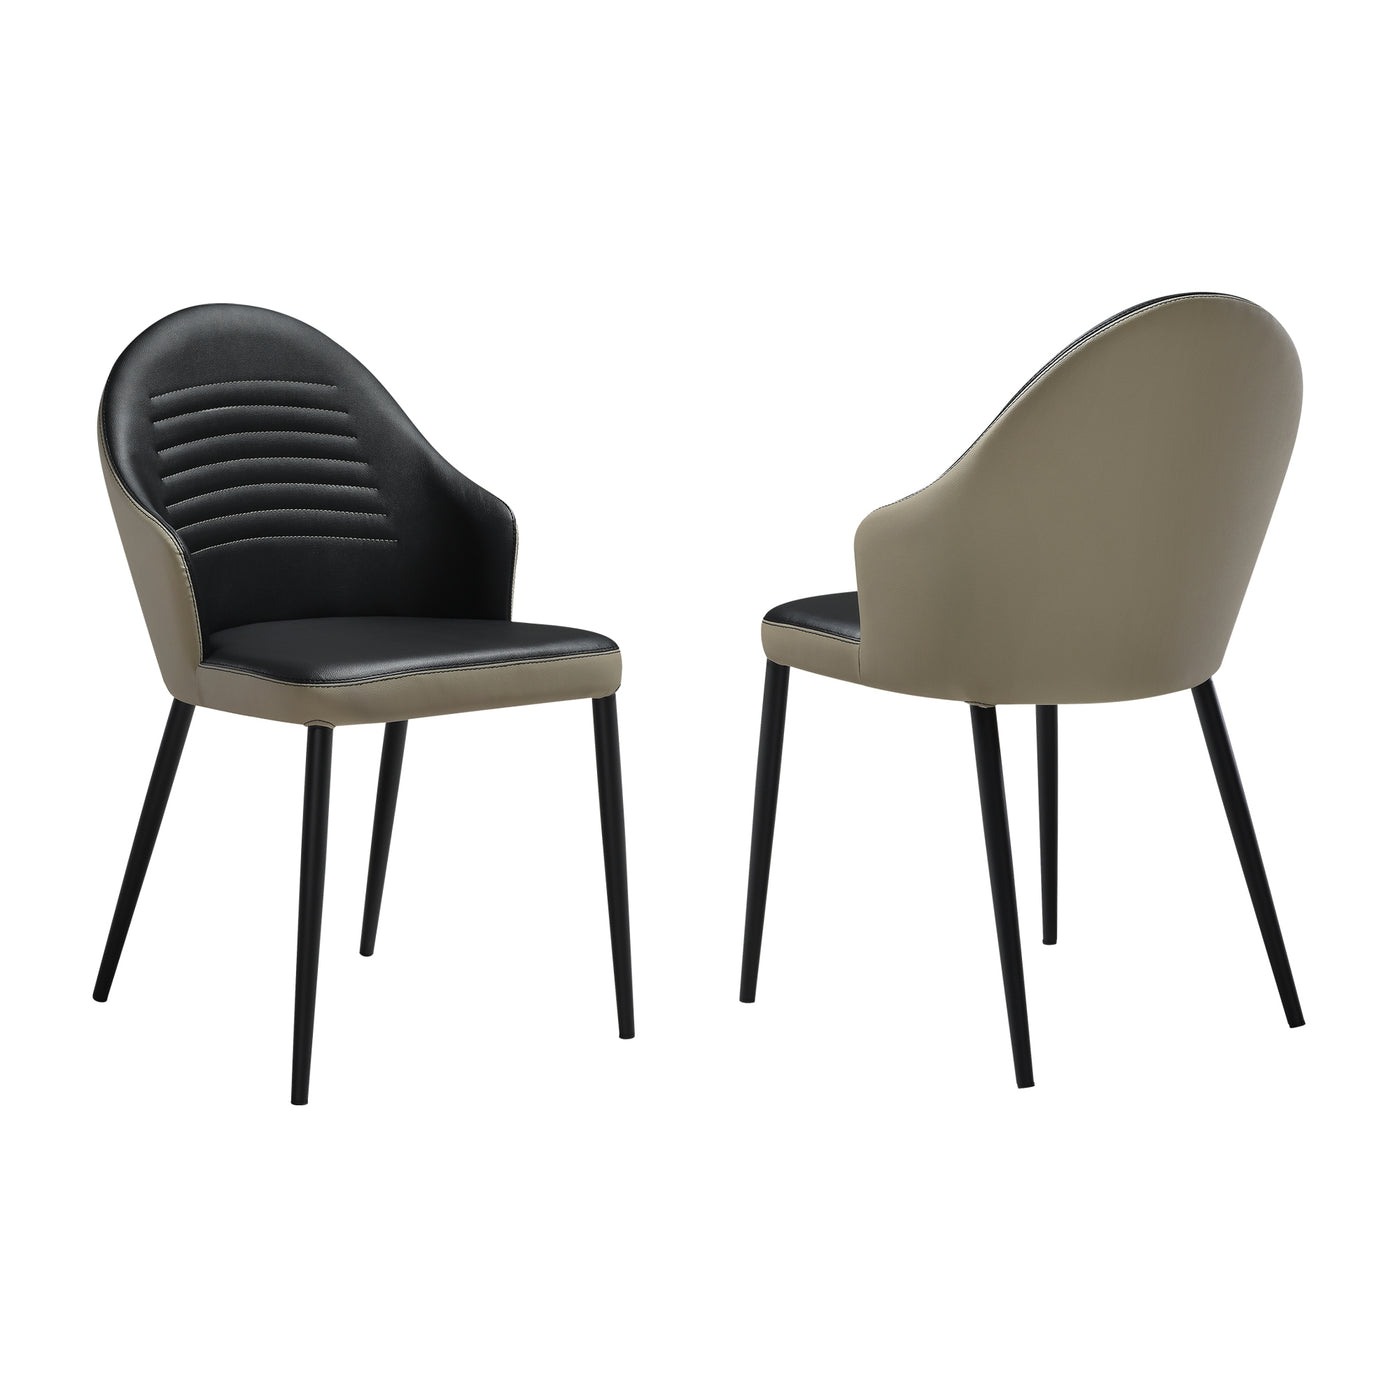 Rocco Upholstered Dining Chair Set of 2